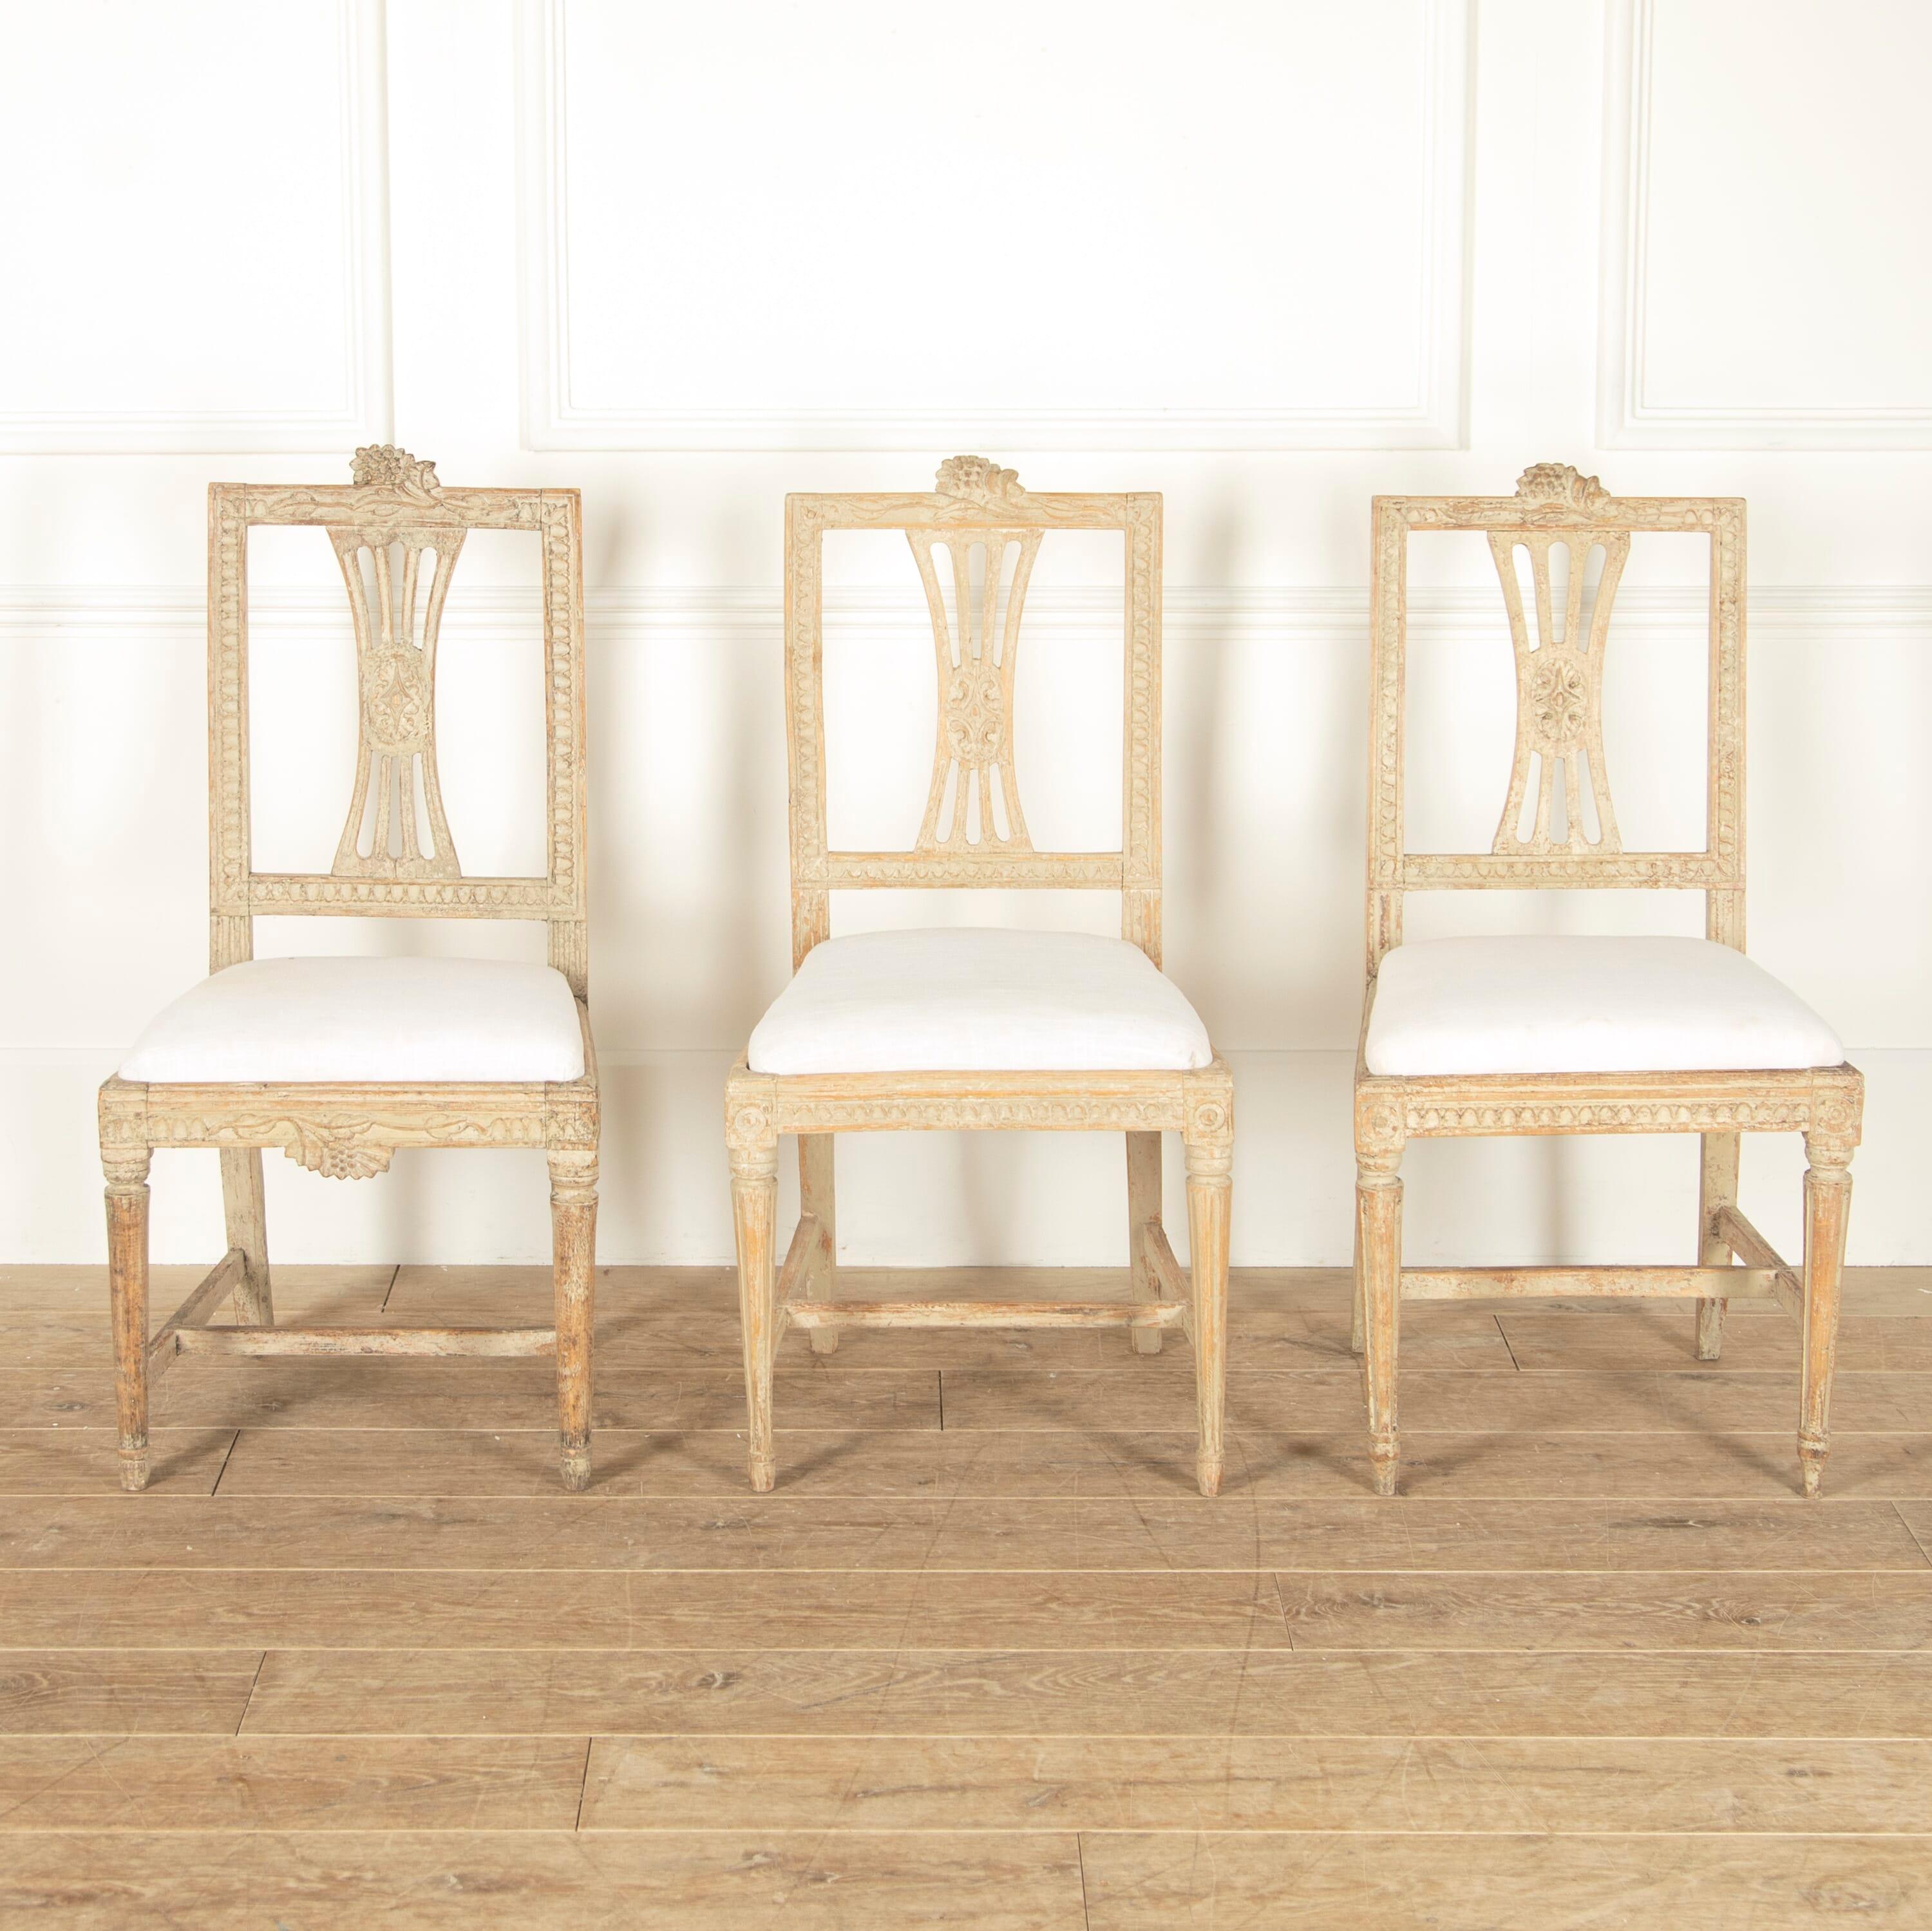 Matched set of 12 19th century dining chairs from the Lindome area of Sweden, Circa 1830-1850.

These lovely chairs embody a classic Swedish design, with their refined and rectilinear form adorned with extensive carving to the frames. 

This set